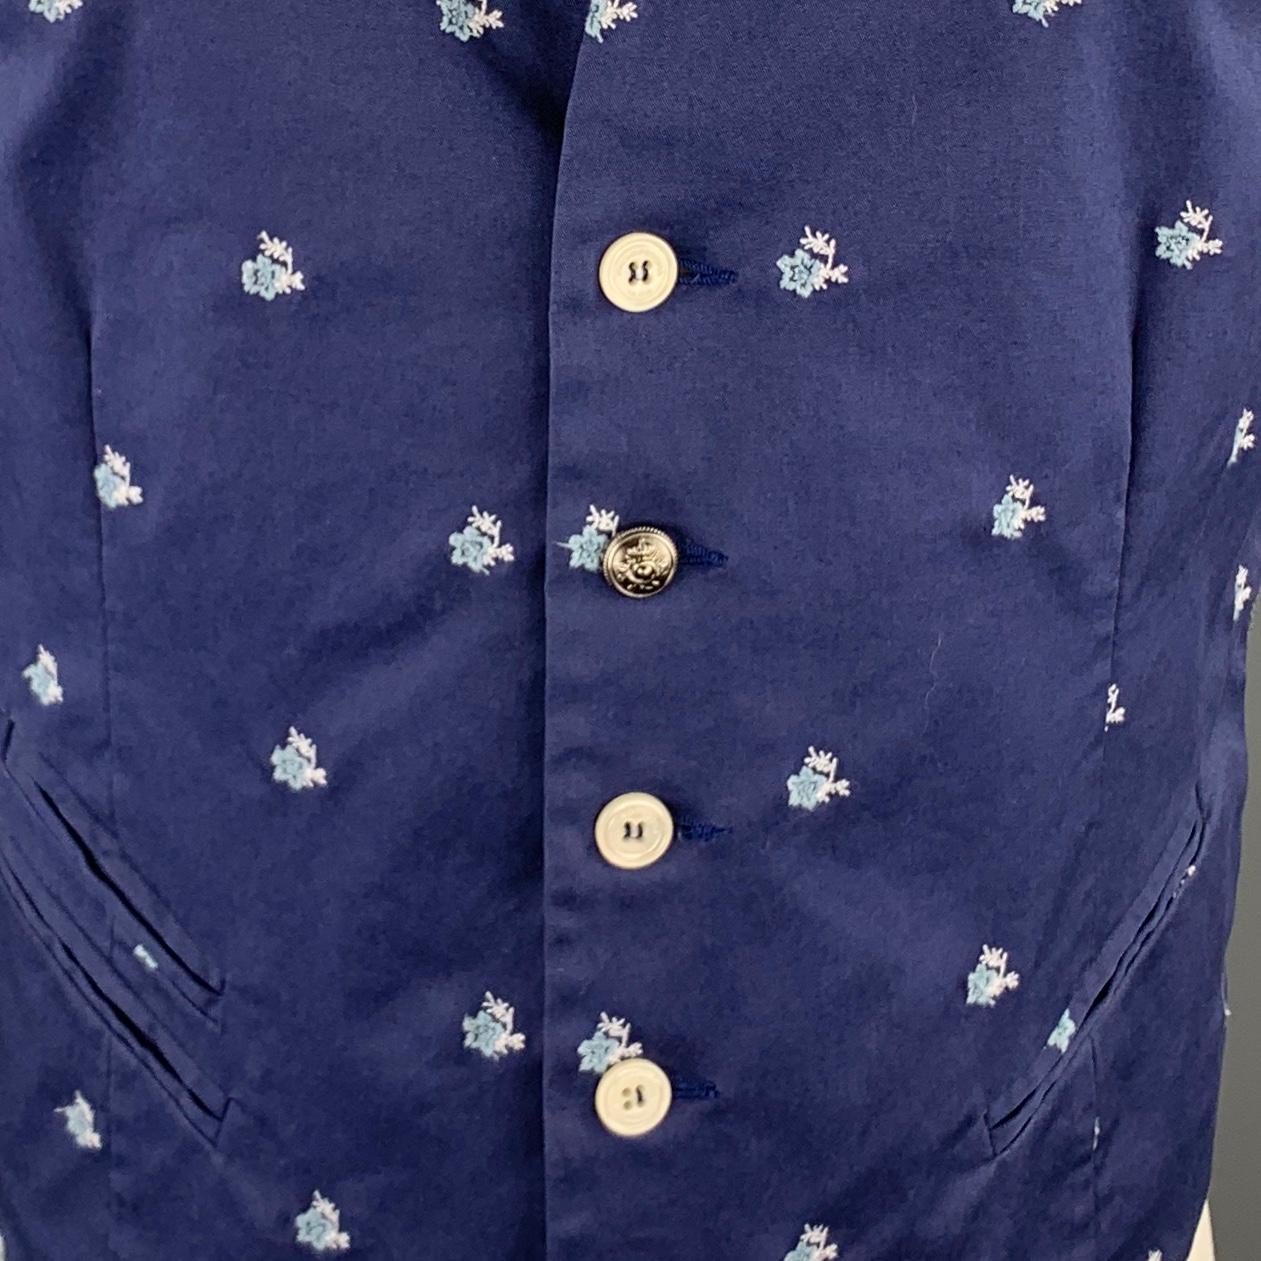 PAOLO PECORA vest comes in blue cotton twill with an all over floral embroidery pattern, striped back belt, and inverted notch lapel neckline.  Made in Italy.

Excellent Pre-Owned Condition.
Marked: IT 48

Measurements:

Shoulder: 12.5 in.
Chest: 40